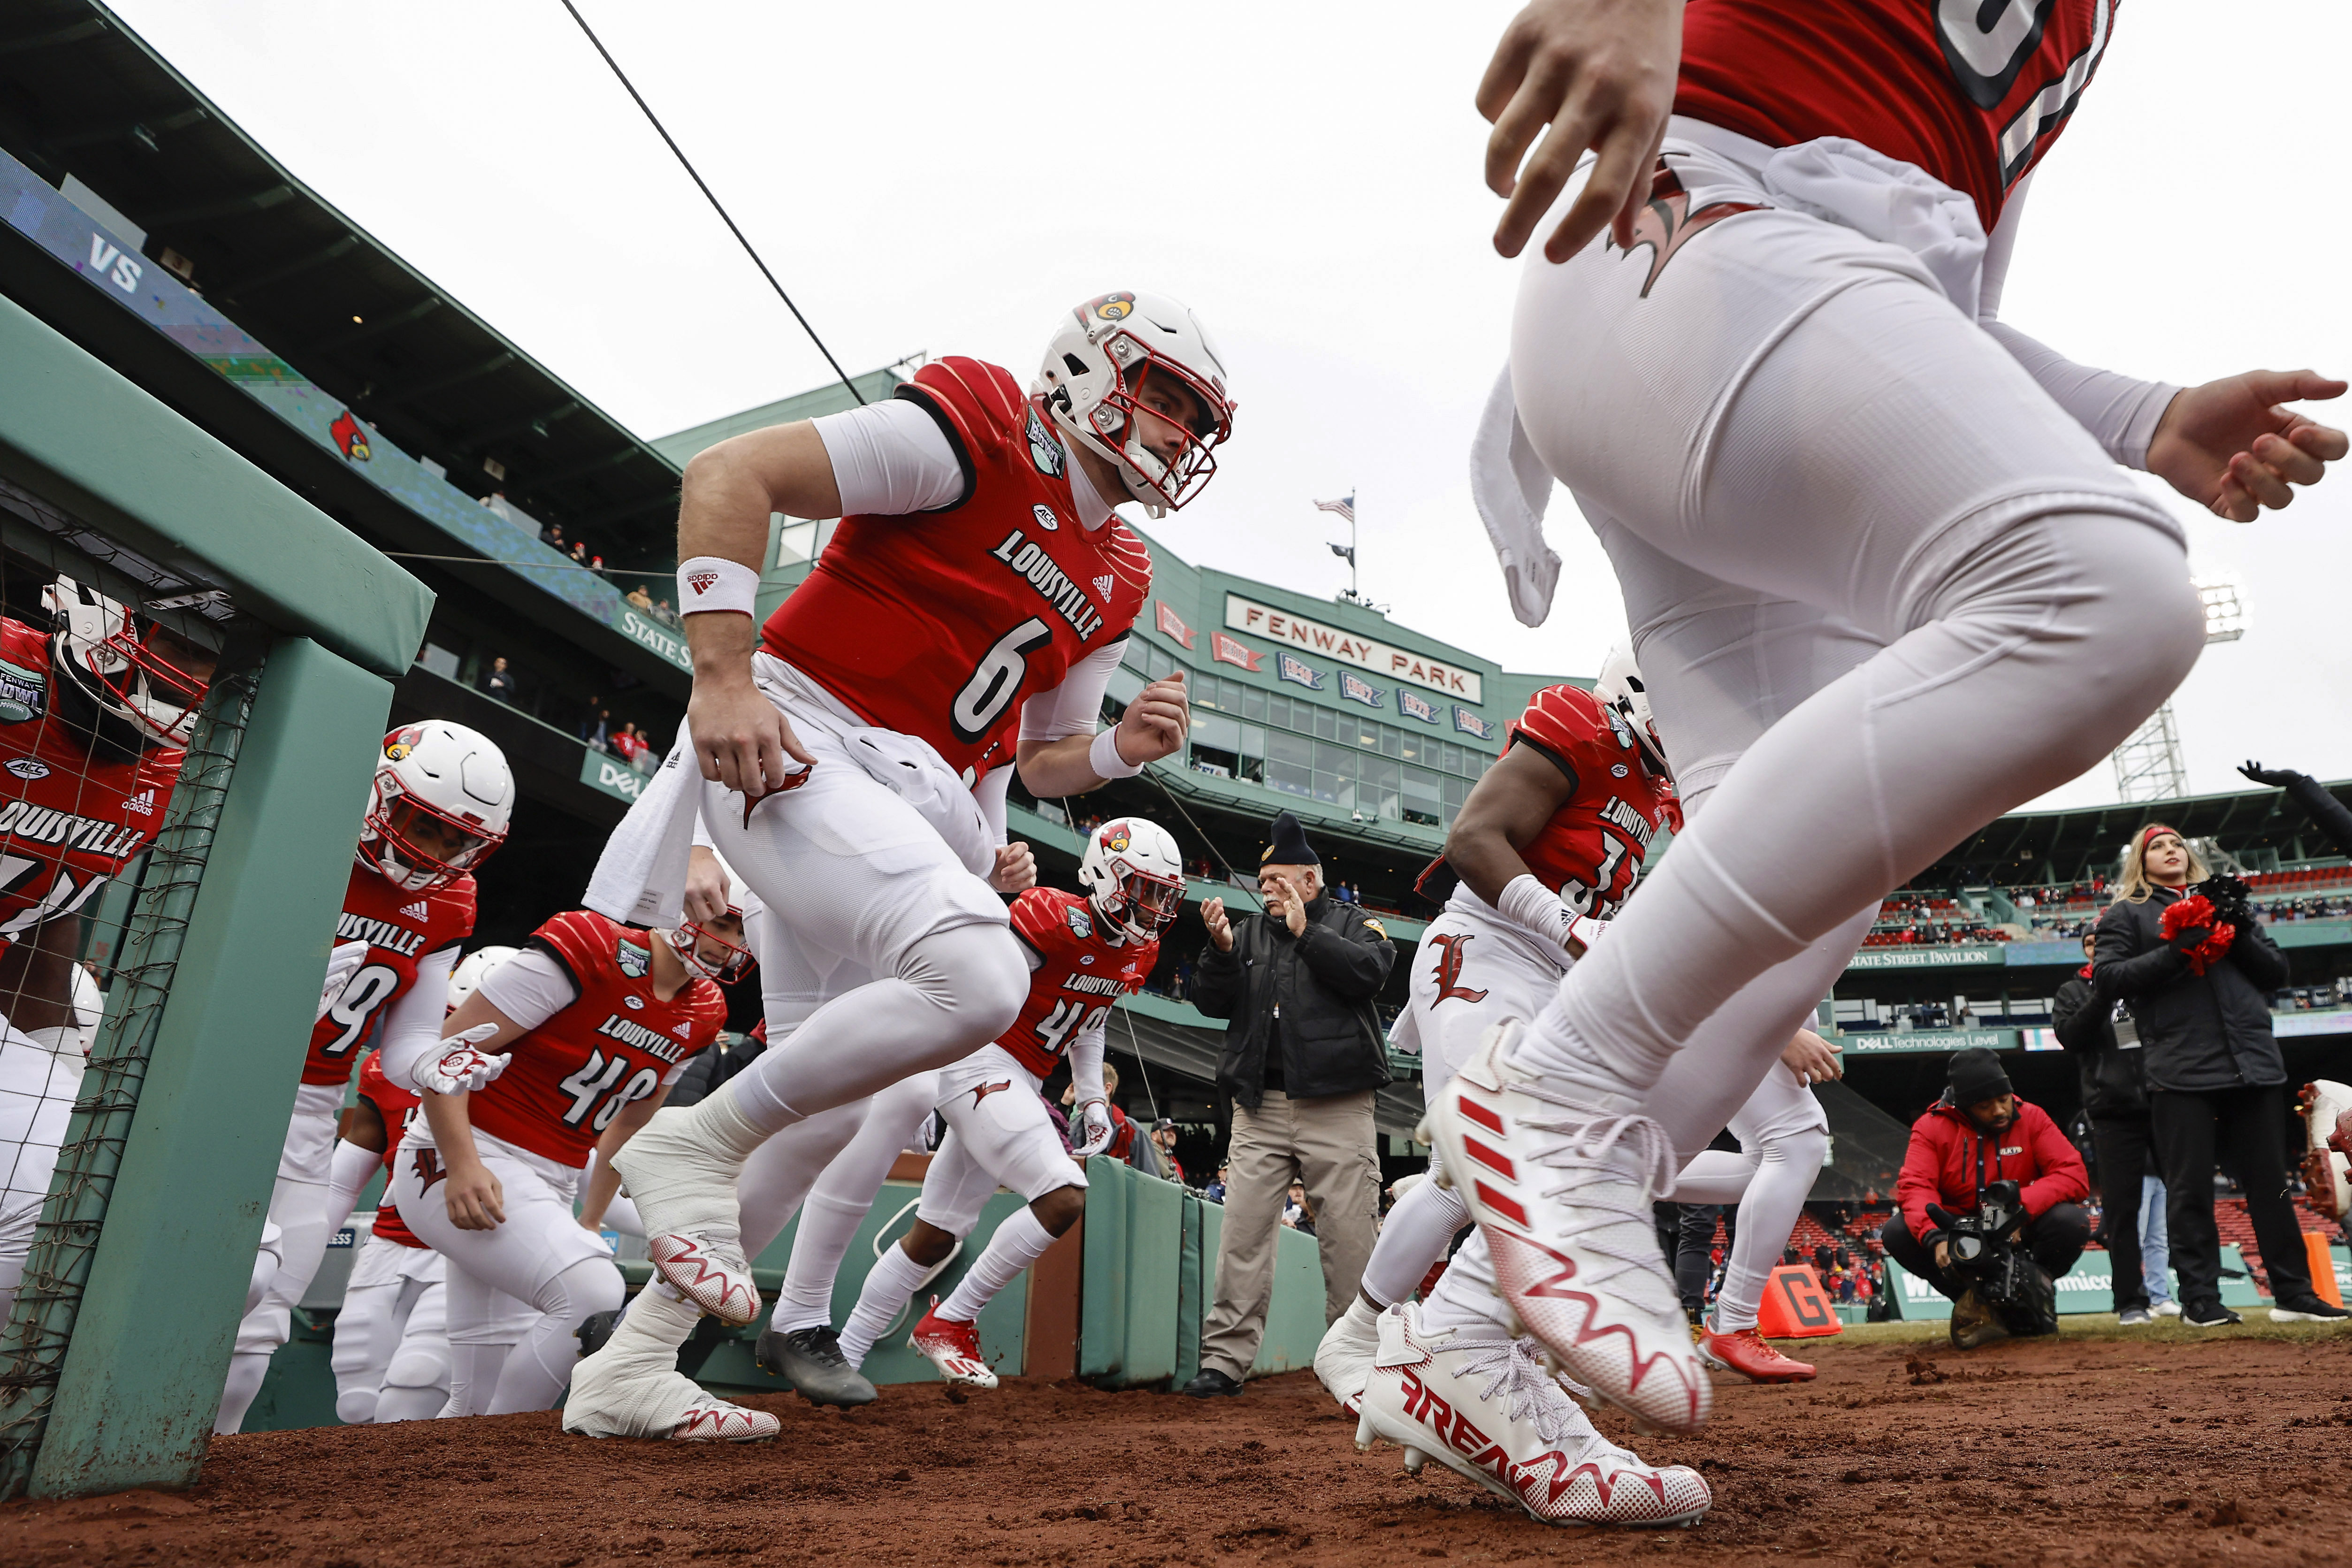 Fenway Park to Host College Football Bowl Game – SportsTravel